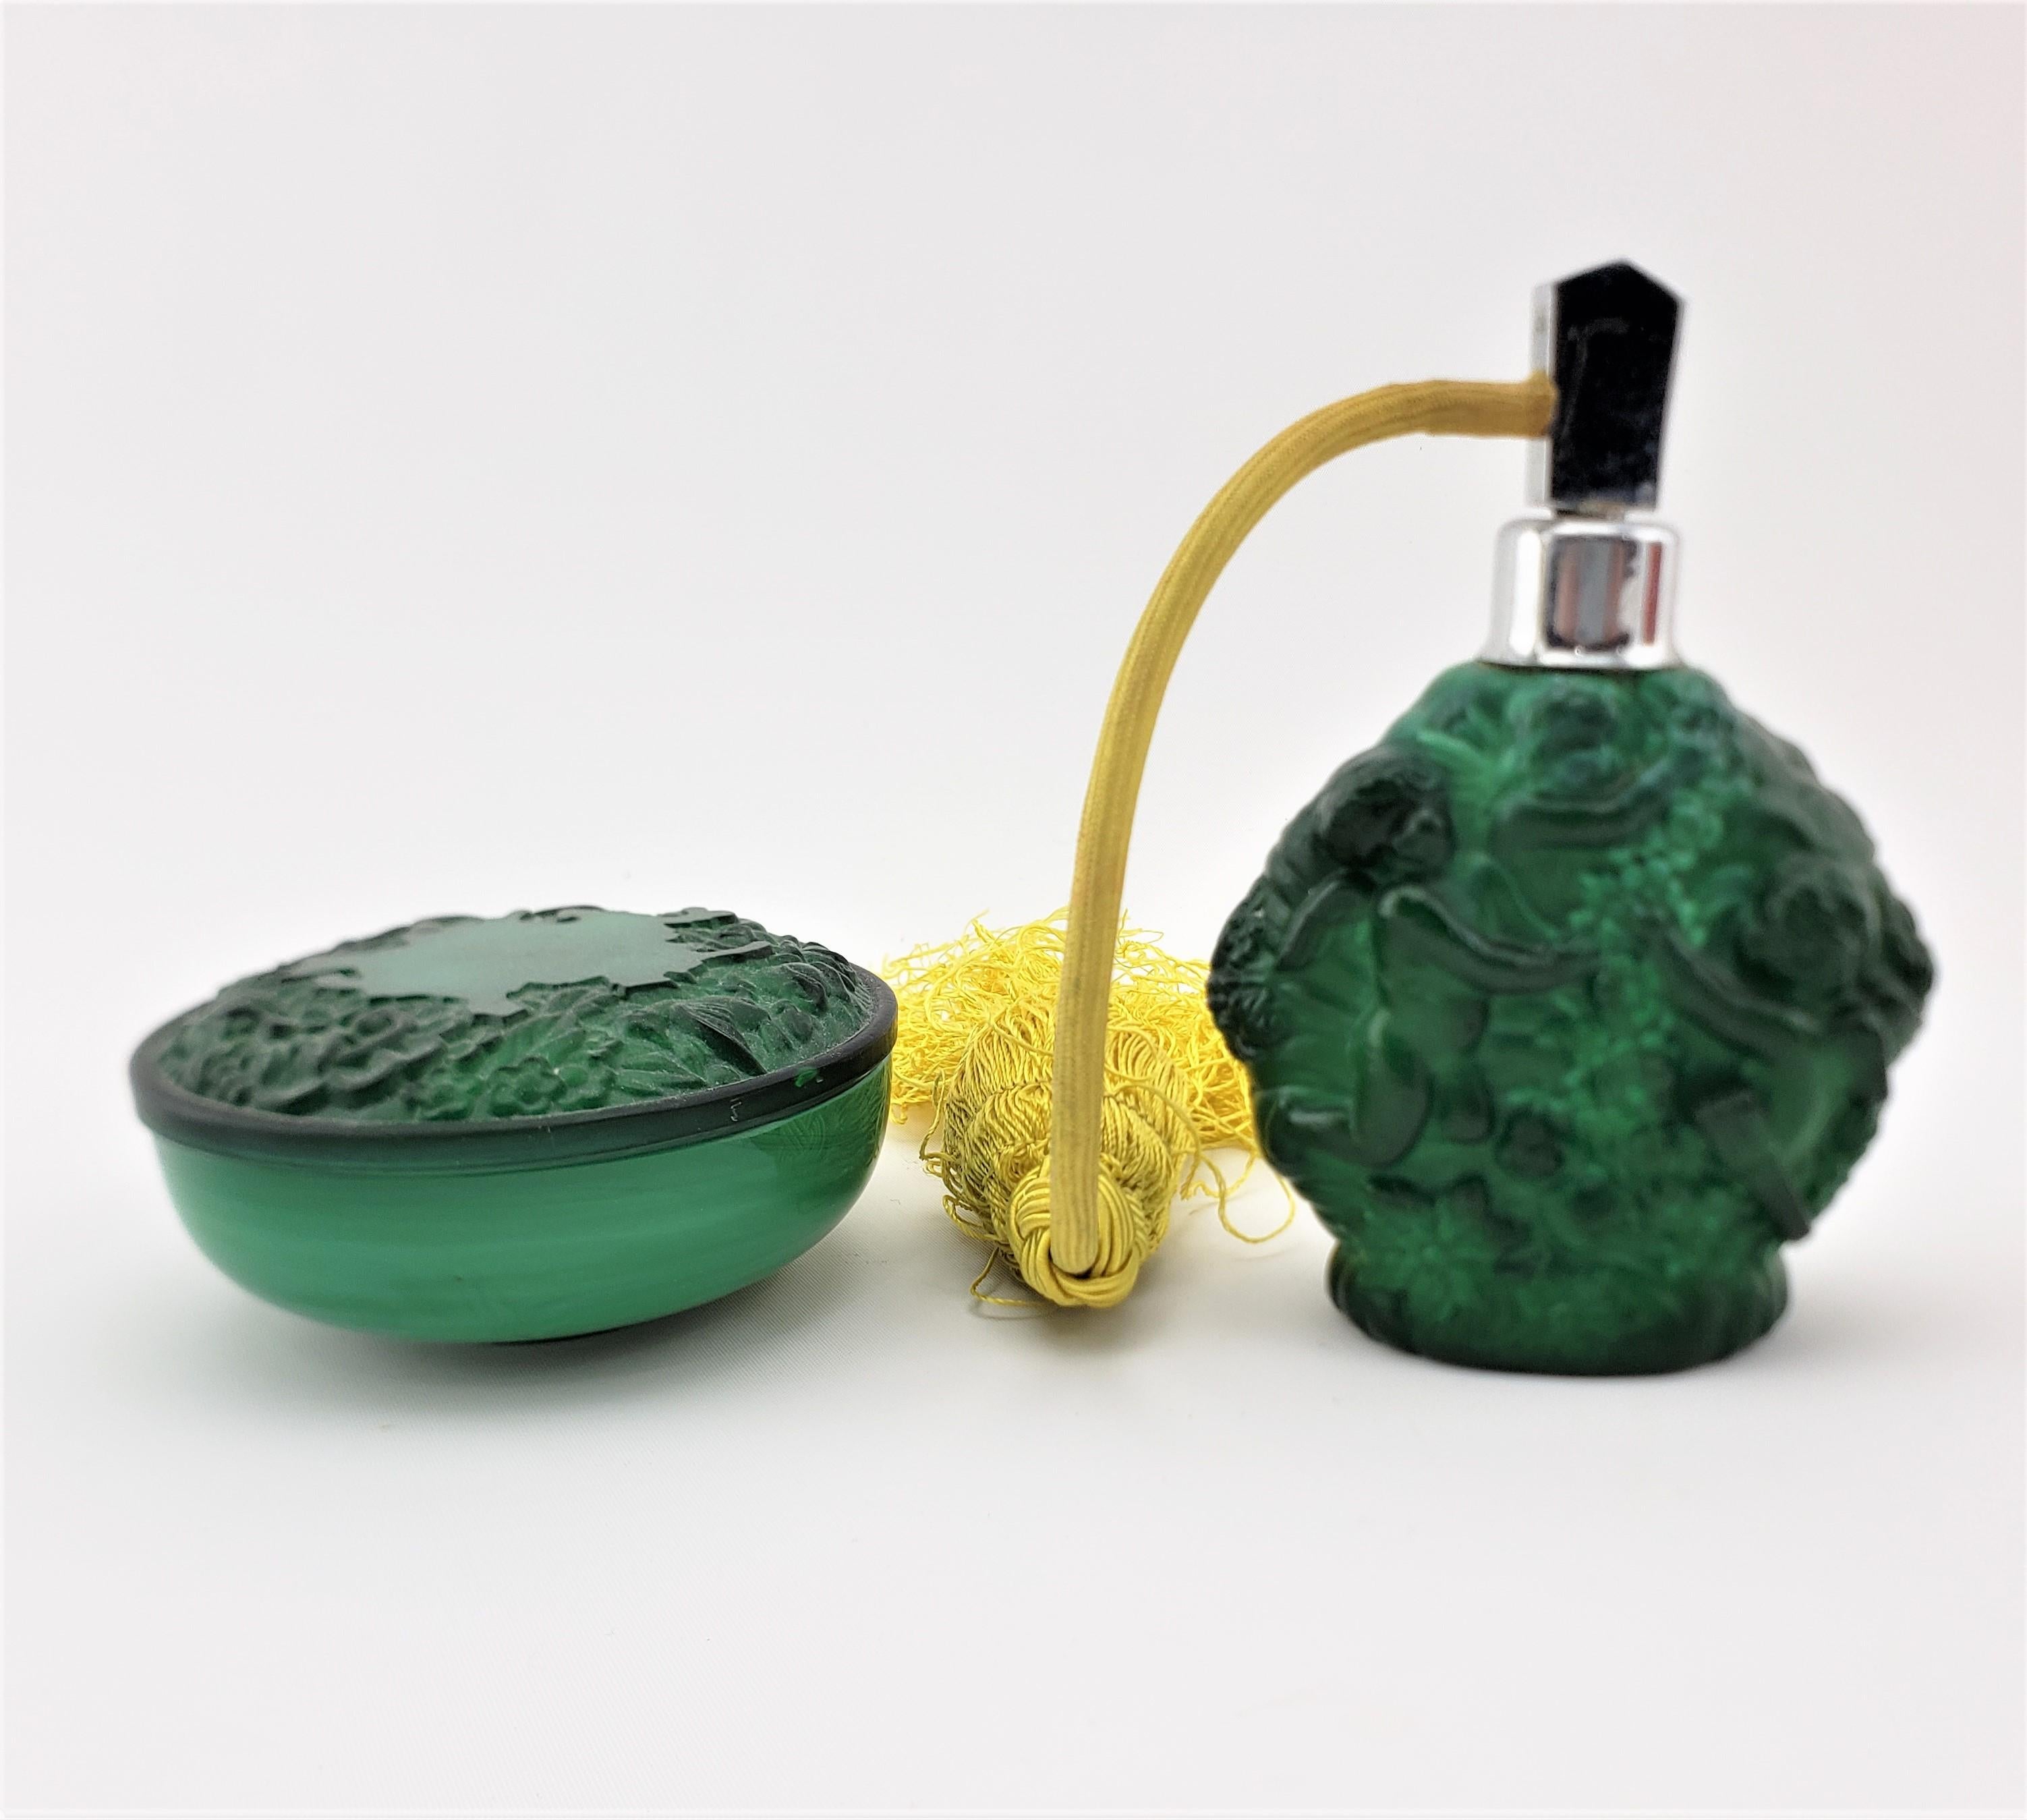 This antique dresser jar and perfume bottle are unsigned, but presumed to have been made in Austria in approximately 1920 in the period Art Deco style. The set is done in deep green malachite colored glass and is decorated with neoclassical figures